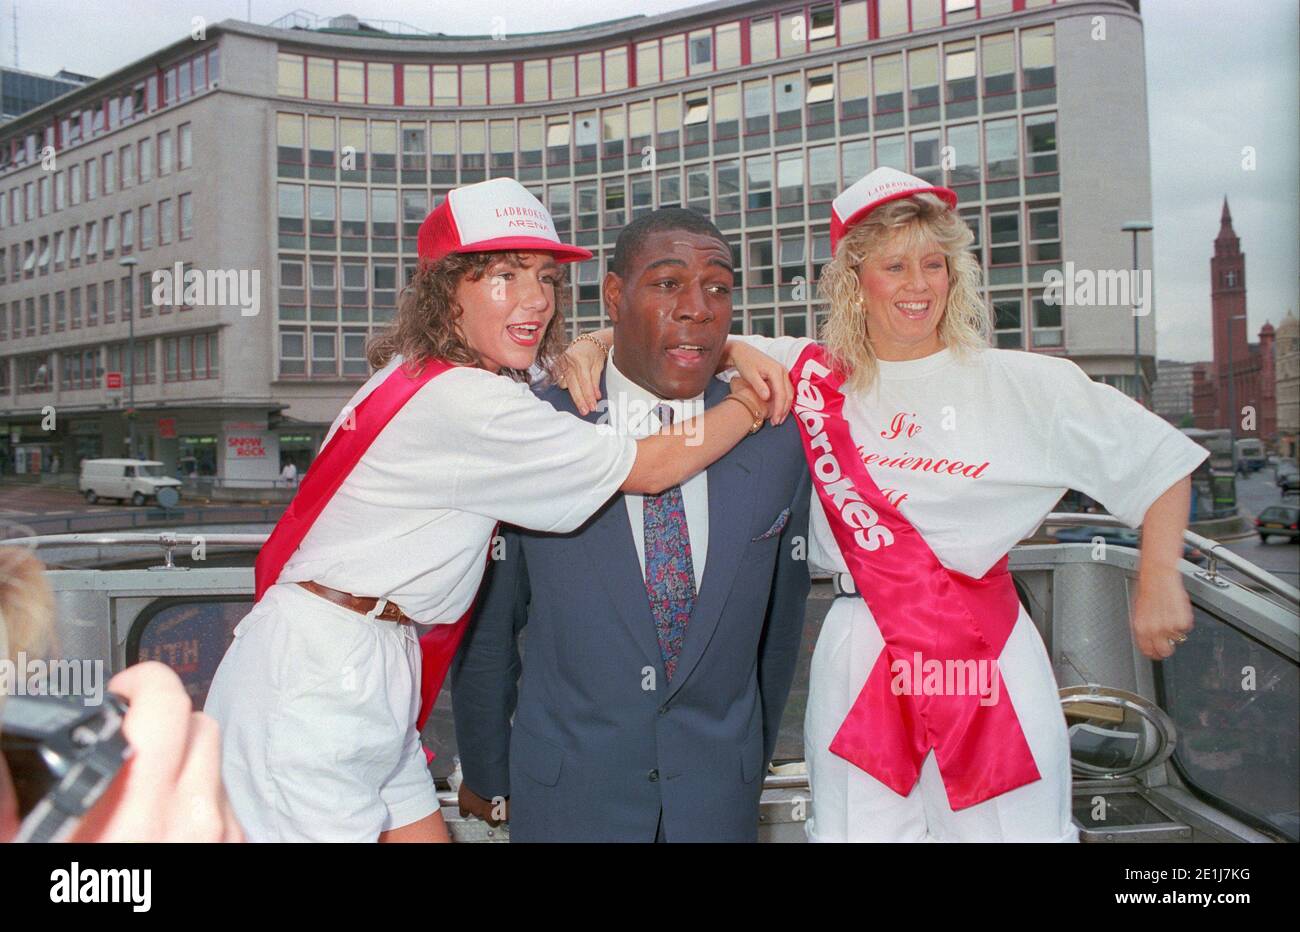 Frank Bruno opens a new Ladbrokes in Birmingham city centre in July 1990 with the company of two promotional girls to publicise the event. Stock Photo